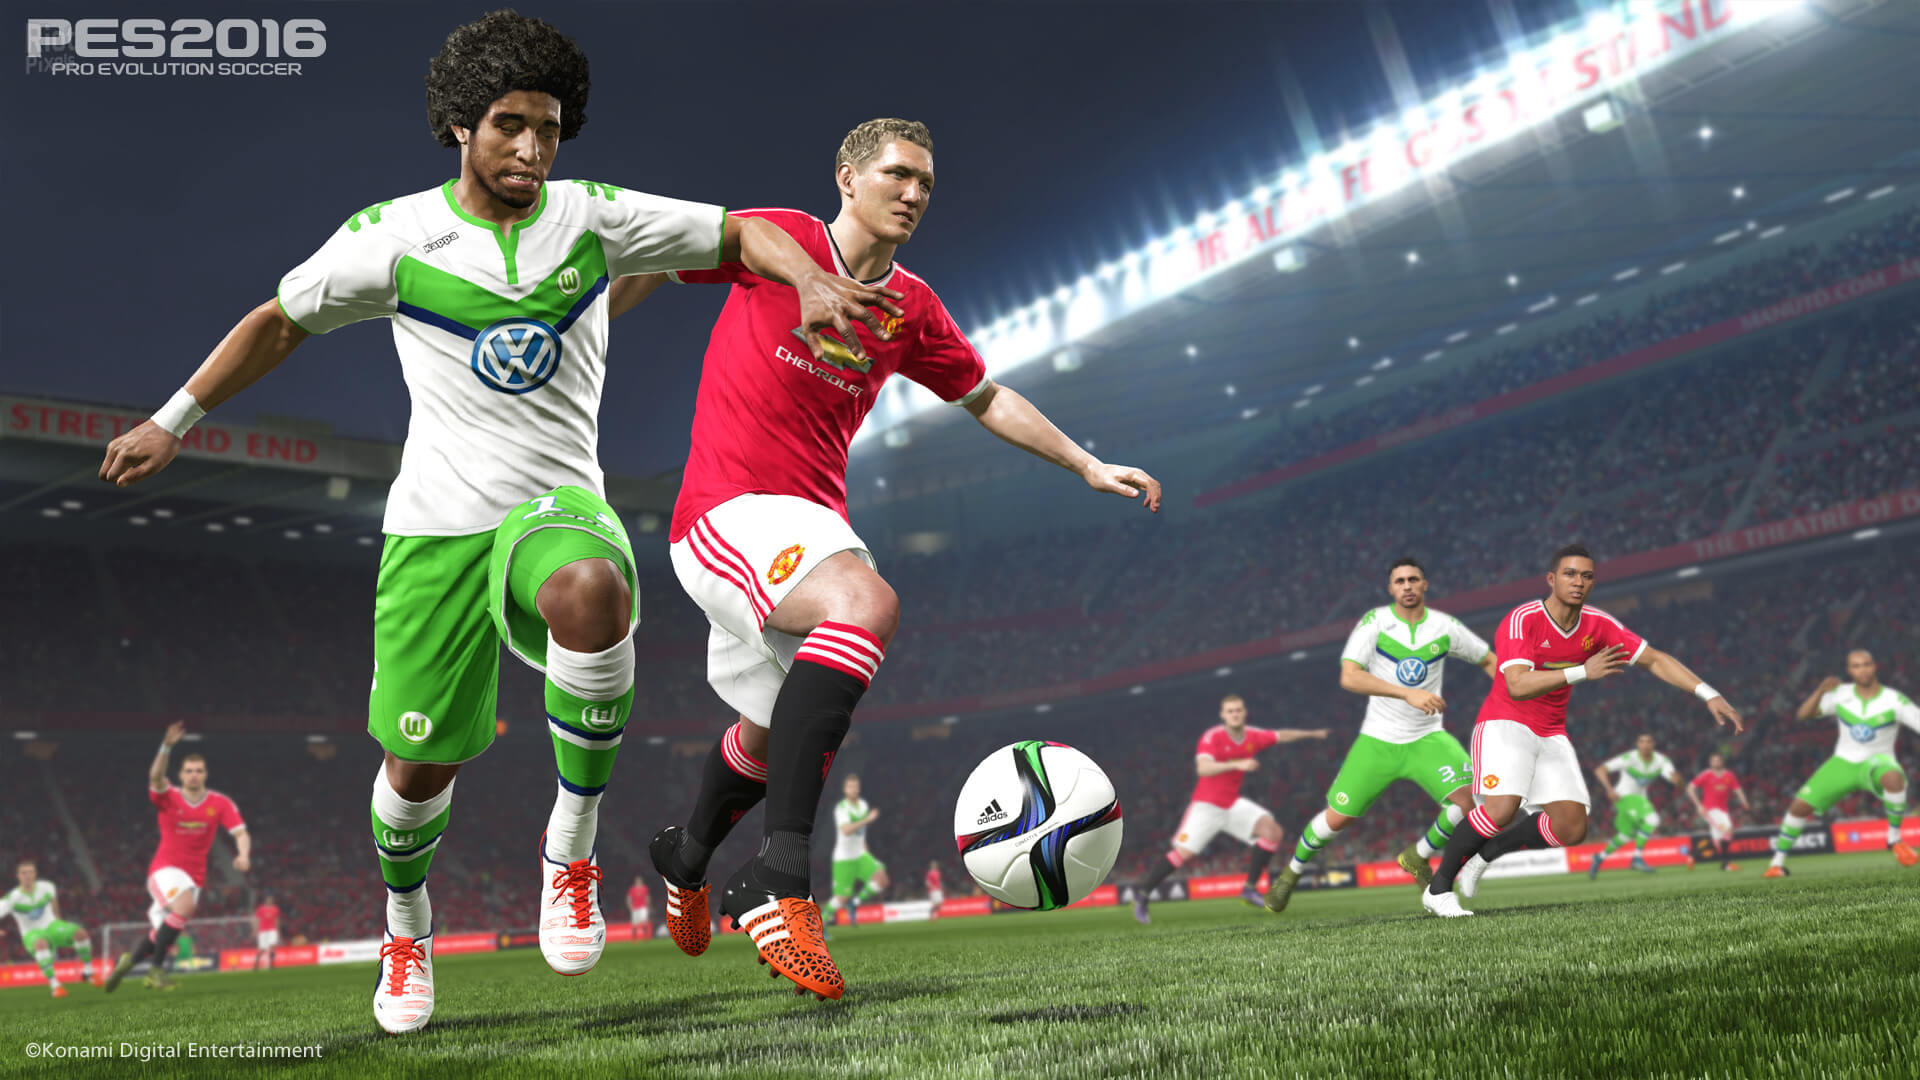 Pro Evolution Soccer (PES) 2016 Highly Compressed For PC in 500 MB Parts - TraX Gaming Center